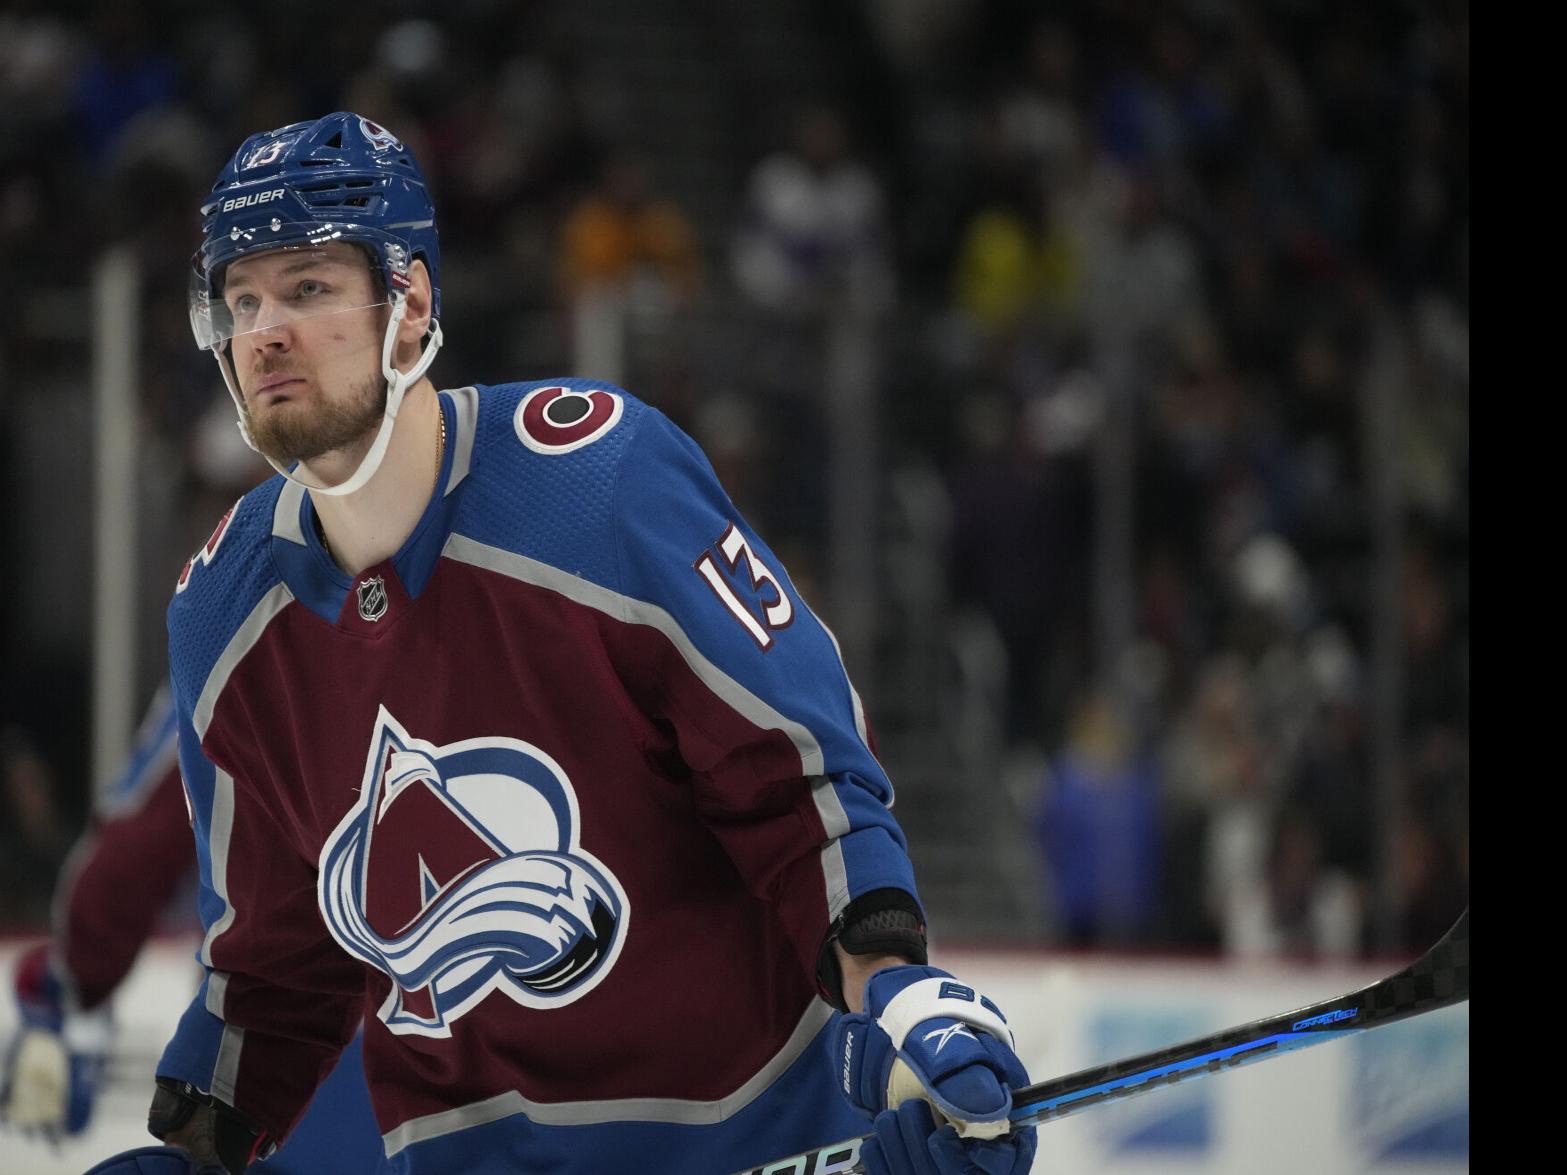 Colorado Avalanche: 5 Players Who Could Improve The Team